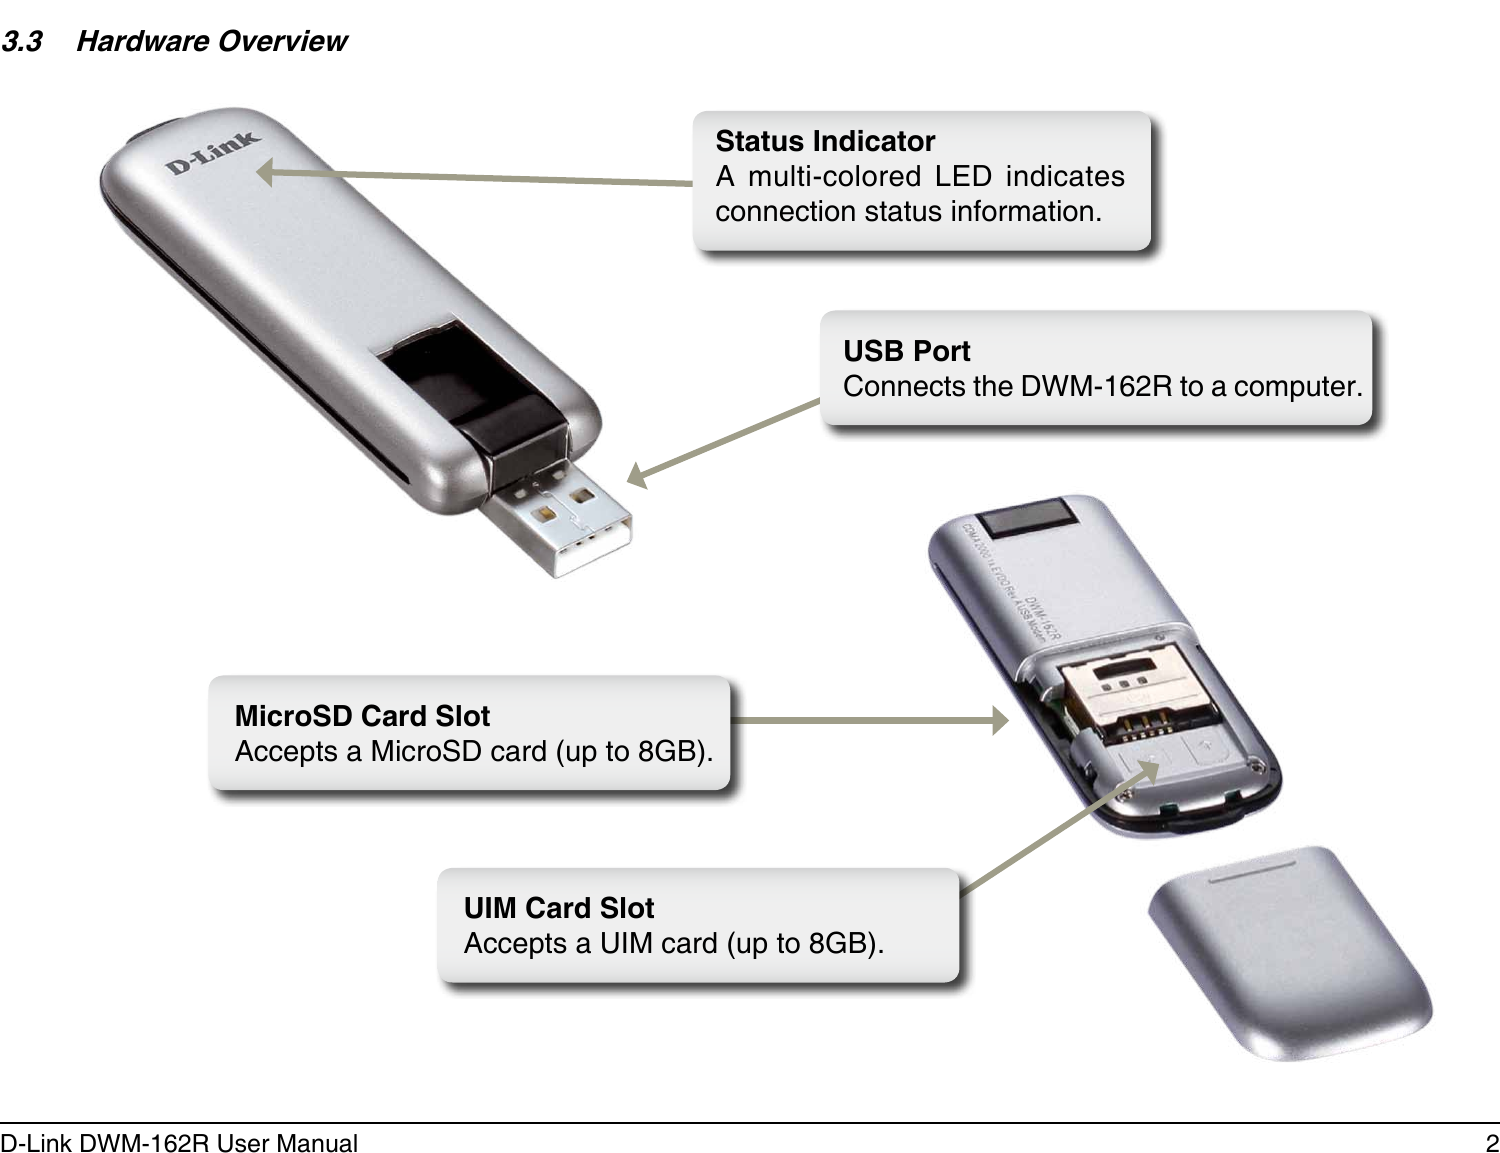 2D-Link DWM-162R User ManualSection 1 - Product OverviewUIM Card SlotAccepts a UIM card (up to 8GB).MicroSD Card SlotAccepts a MicroSD card (up to 8GB).3.3  Hardware OverviewUSB PortConnects the DWM-162R to a computer.Status IndicatorA  multi-colored  LED  indicates connection status information.